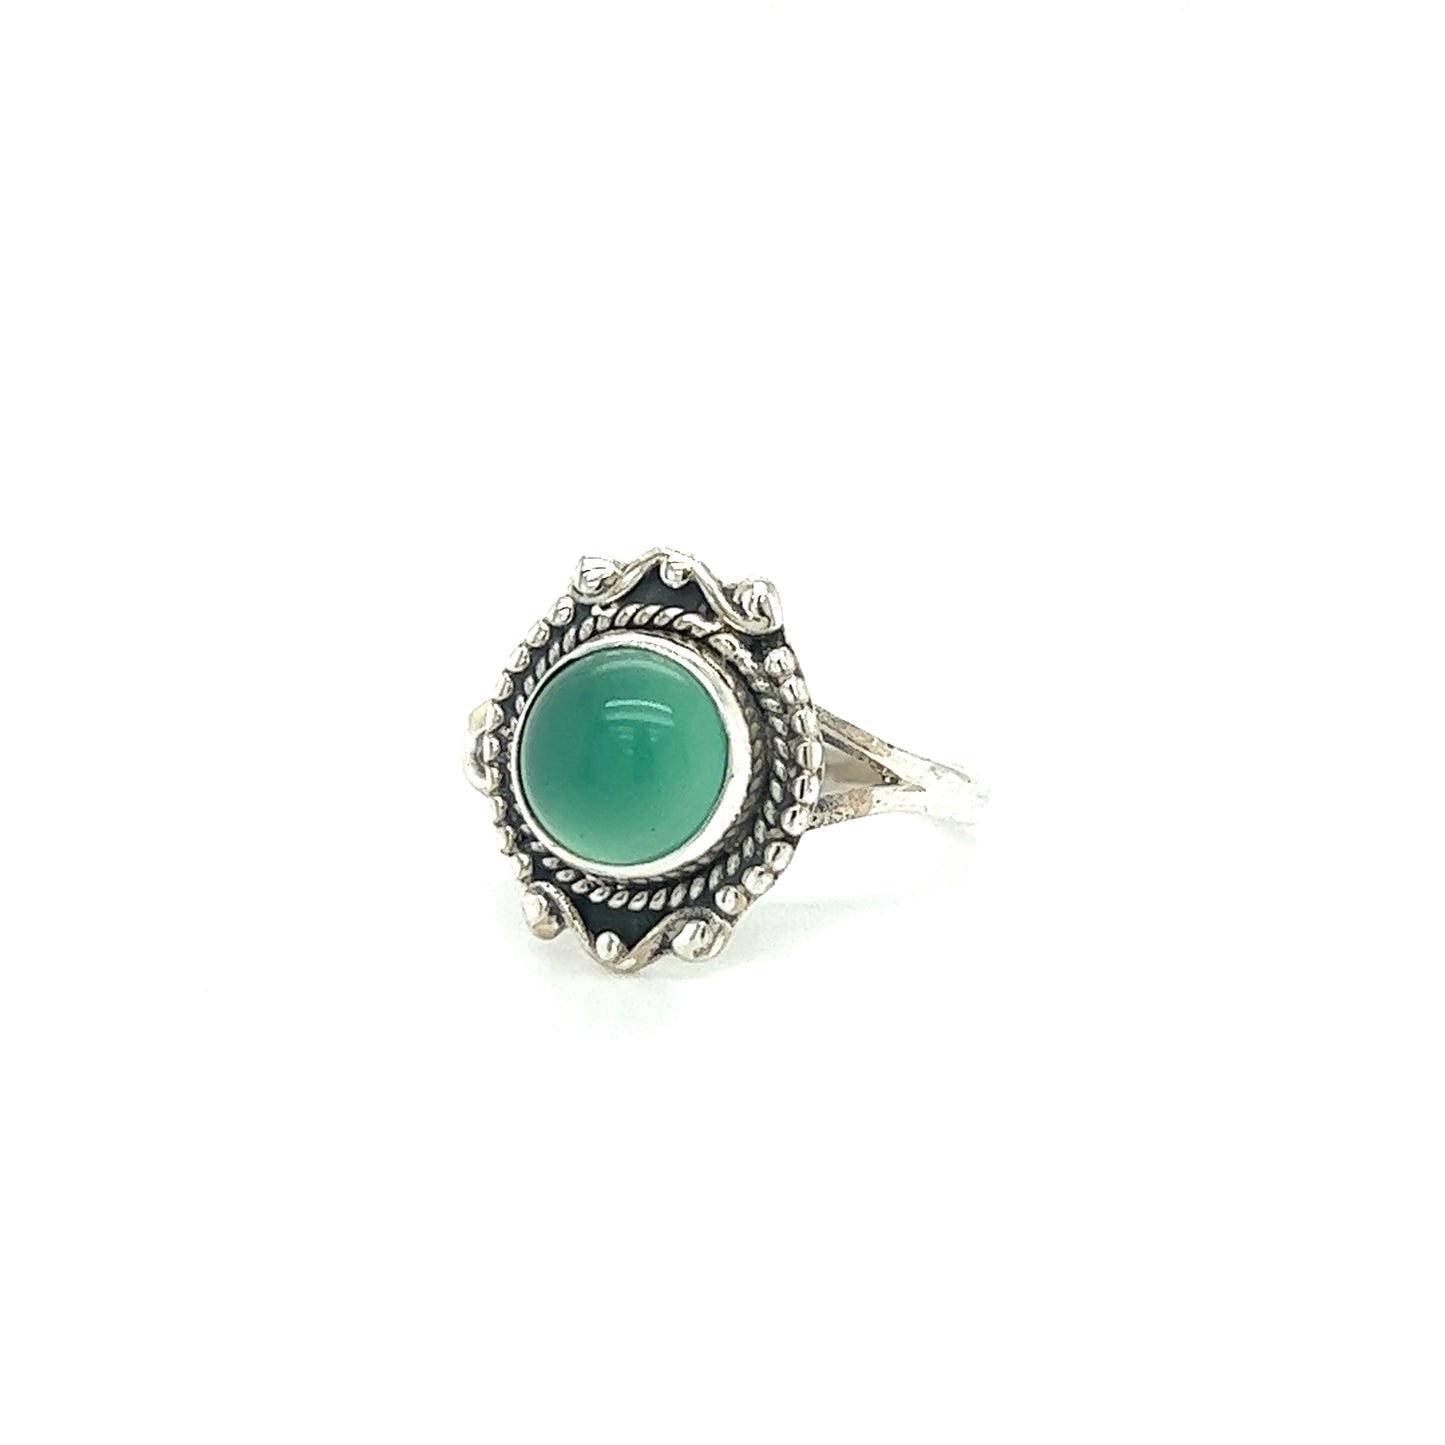 
                  
                    A Round Gemstone Ring With Vintage Setting featuring a green gem set in an ornate bezel with intricate detailing, this sterling silver ring captures the essence of Bohemian jewelry.
                  
                